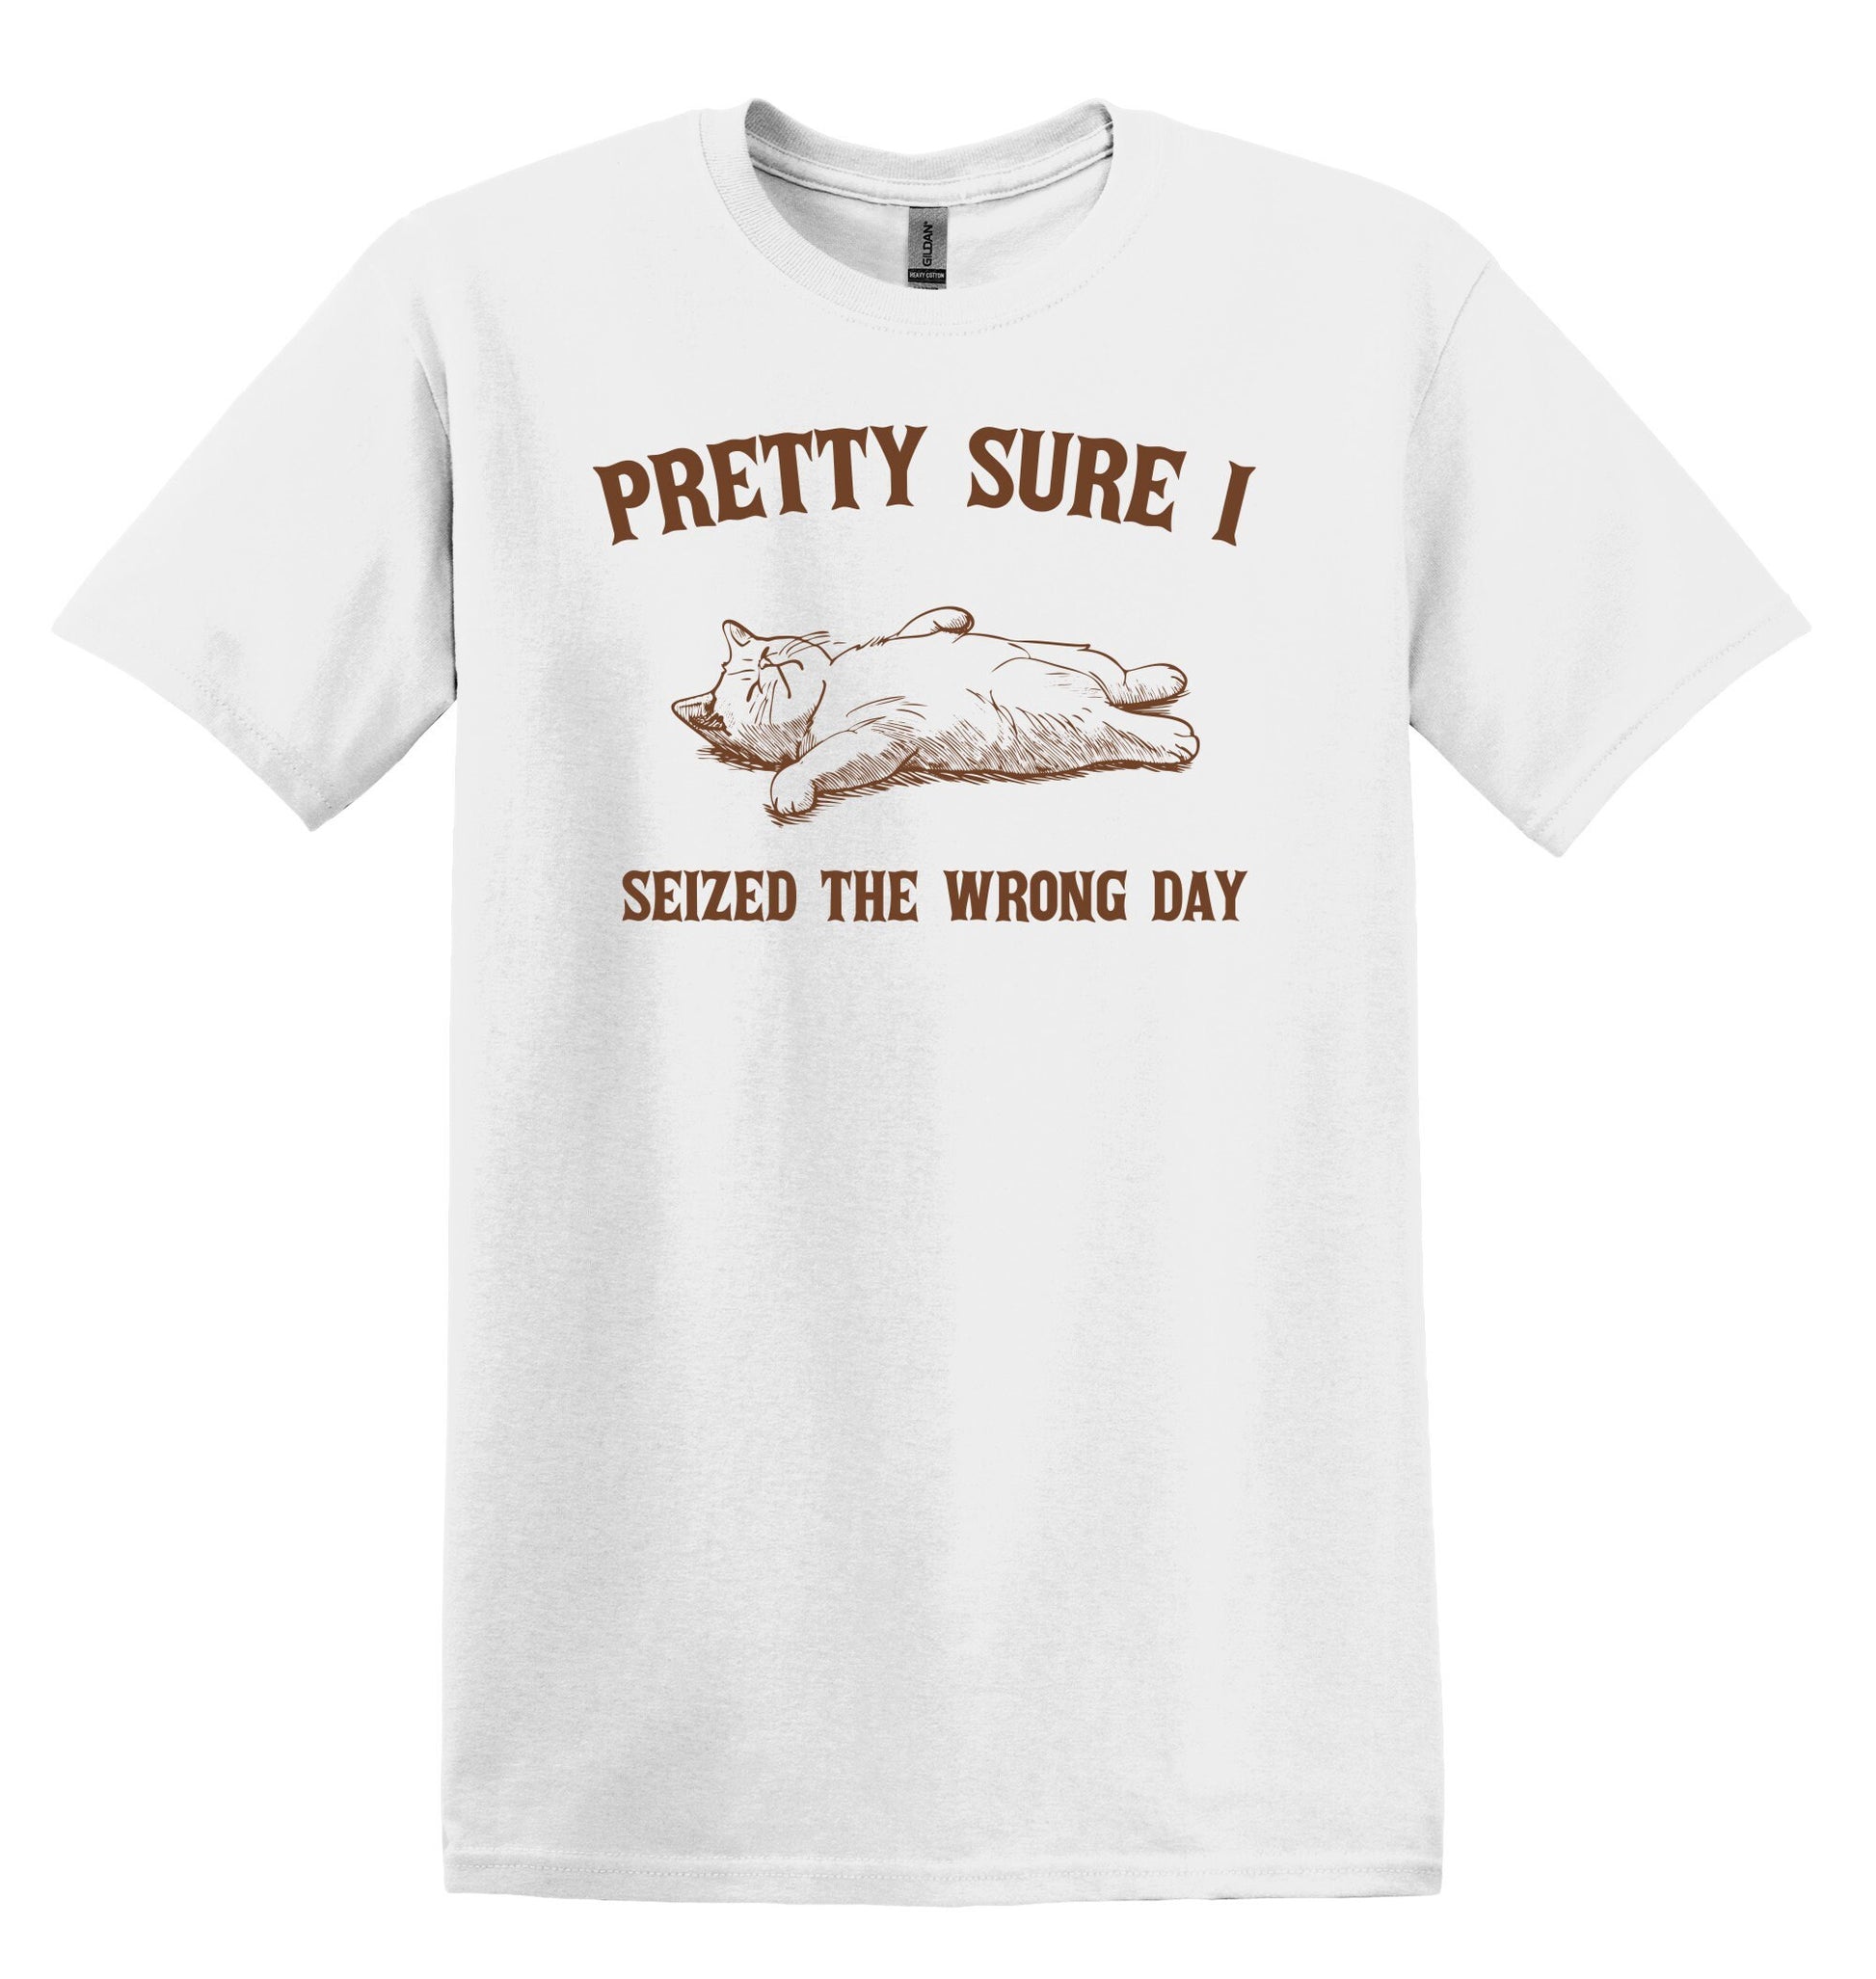 Pretty Sure I Seized the Wrong Day Cat T-shirt Graphic Shirt Funny Adult TShirt Vintage Funny TShirt Nostalgia T-Shirt Relaxed Cotton Shirt